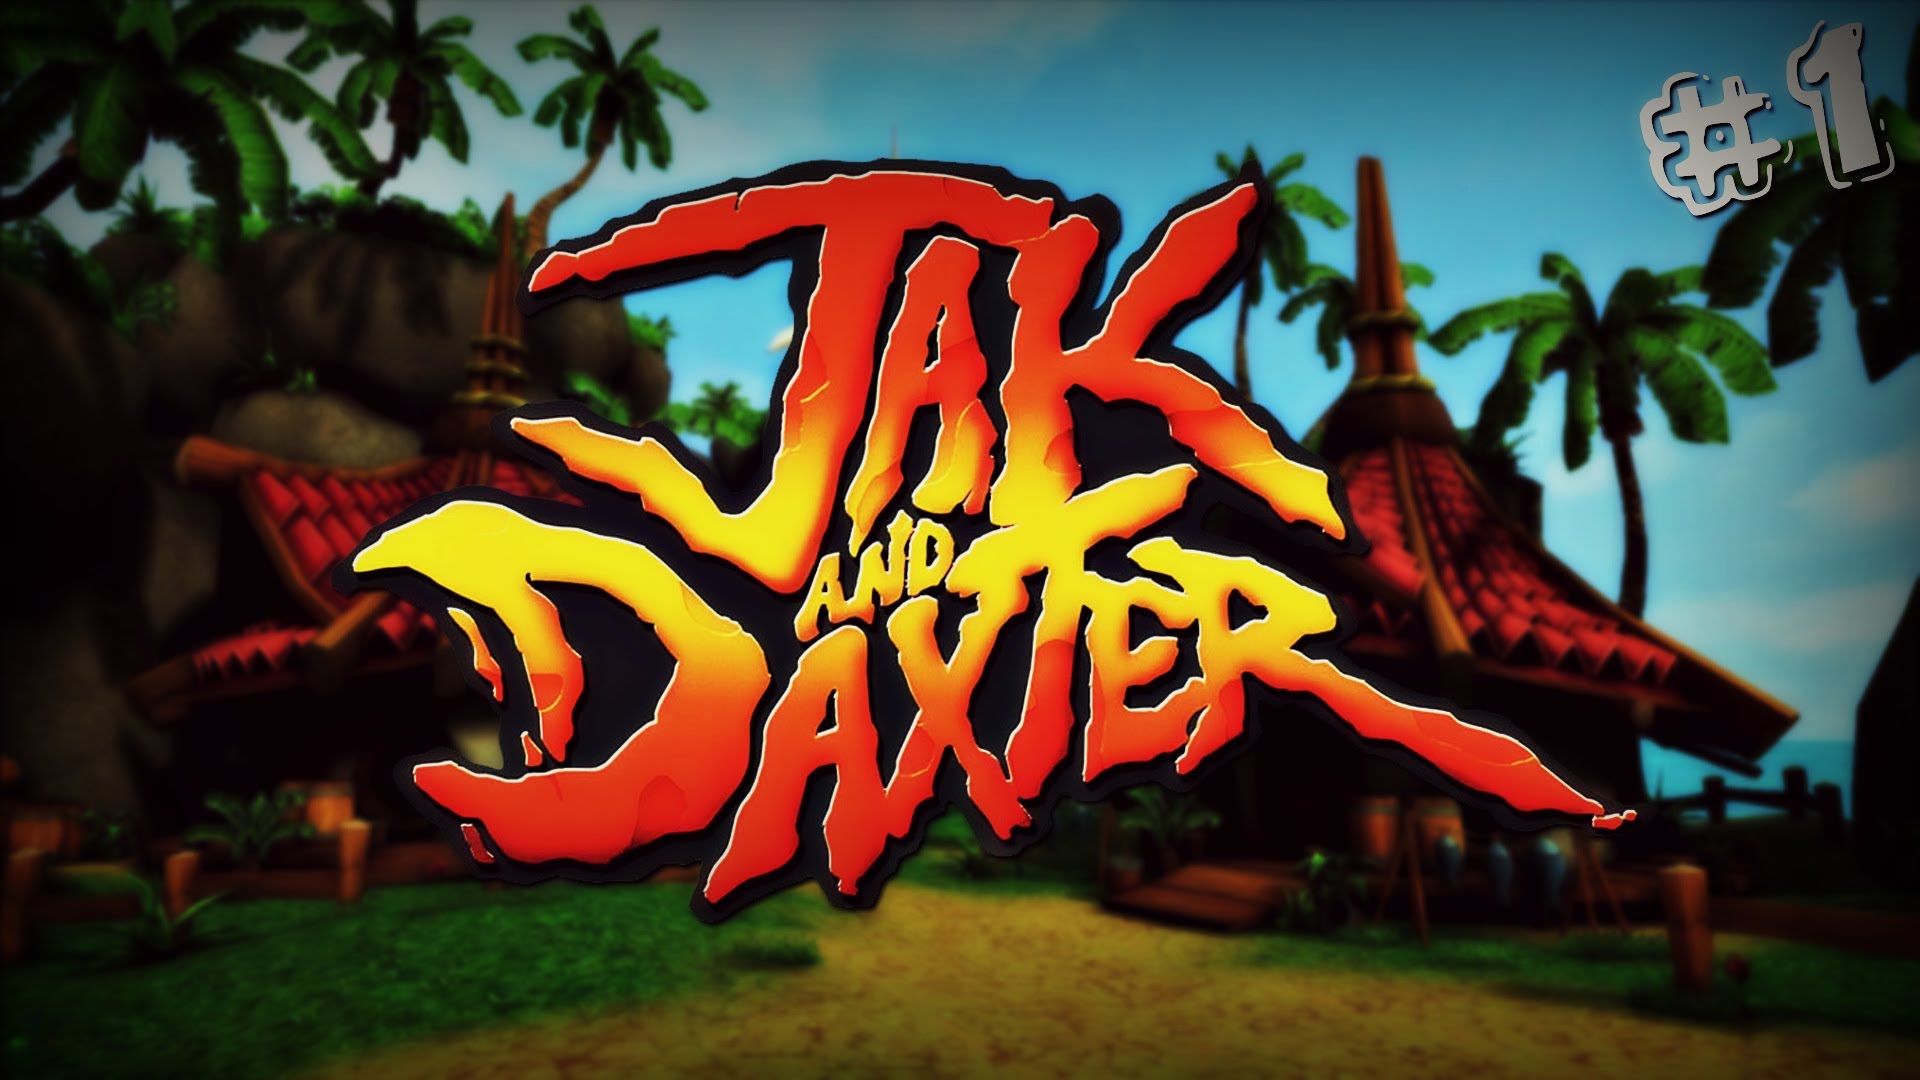 jak and daxter download free wallpapers